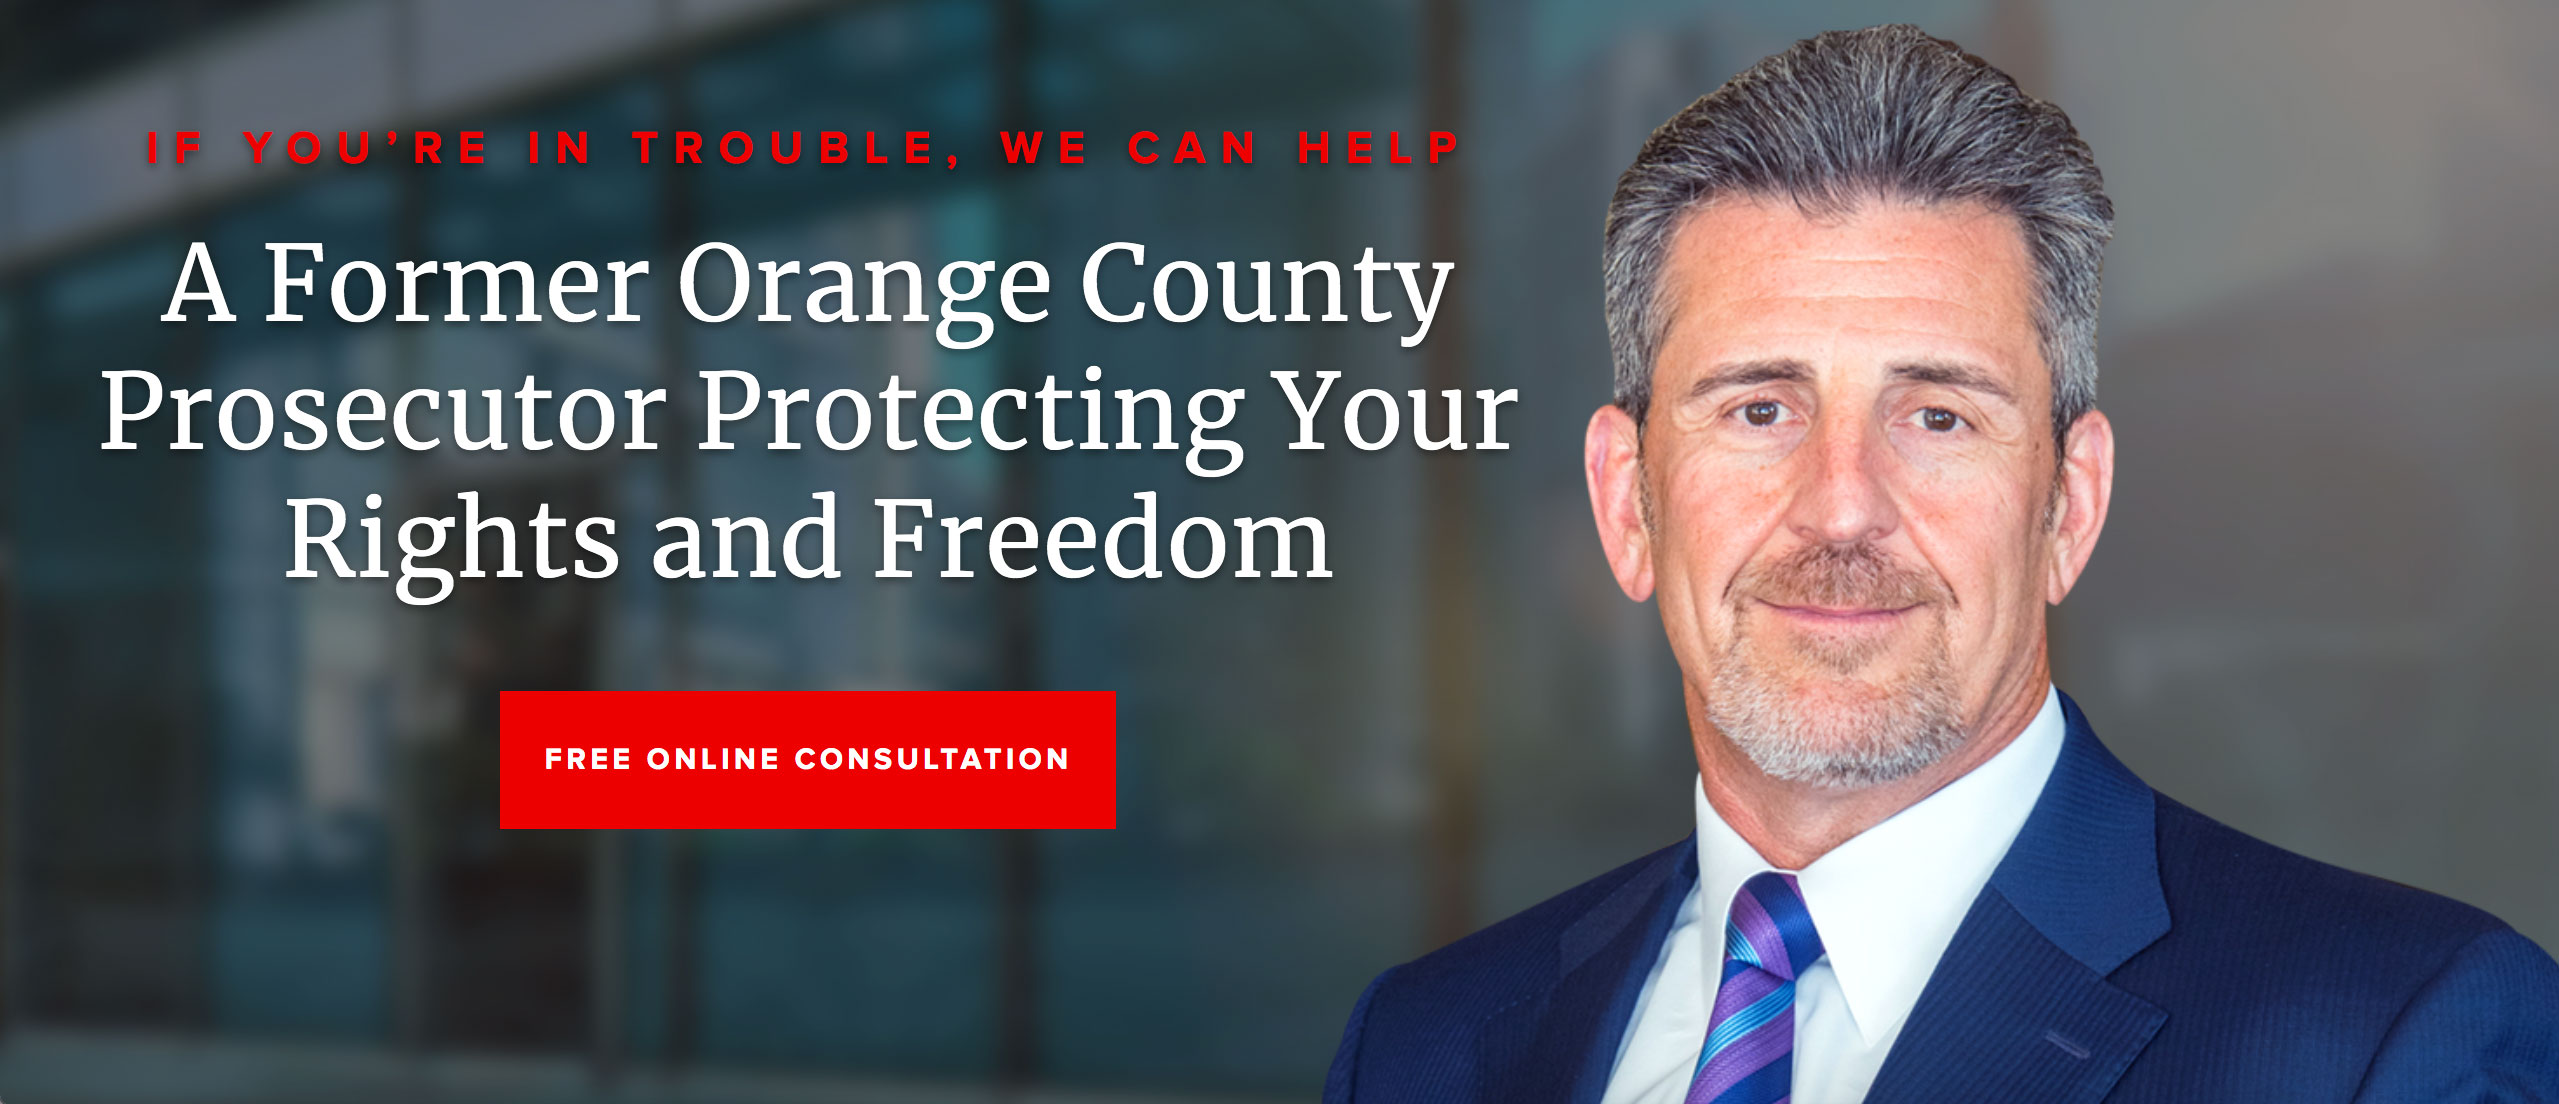 How an Orange County Gun Crime Lawyer Can Help Protect Your Rights - Long-term assistance with record expungement or restoration of rightsOrange county gun crime lawyer